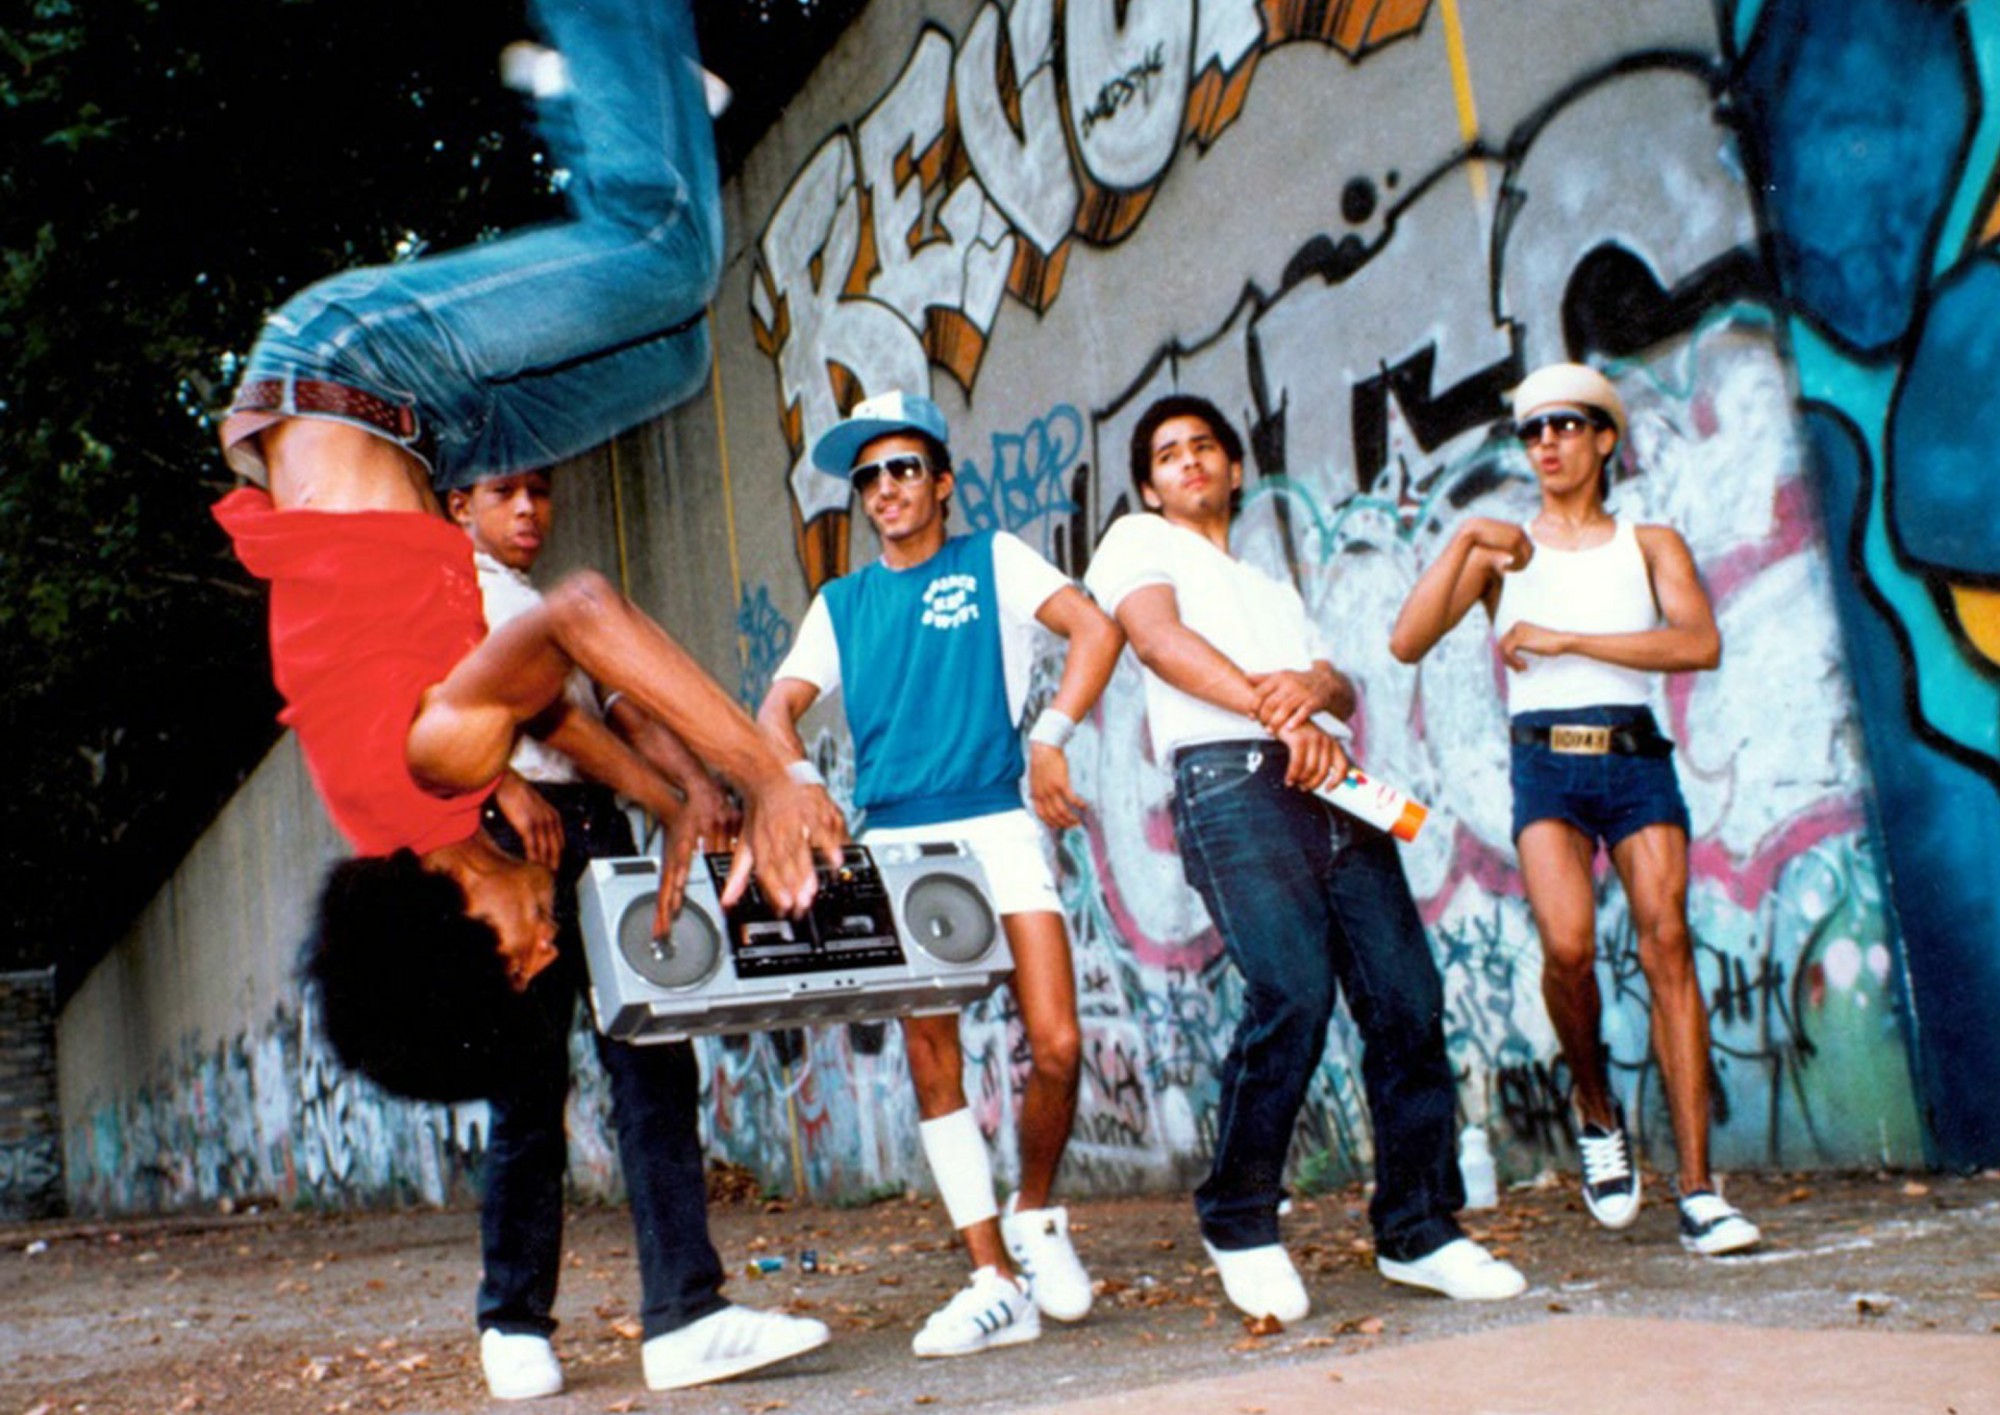 Image from the motion picture Wild Style